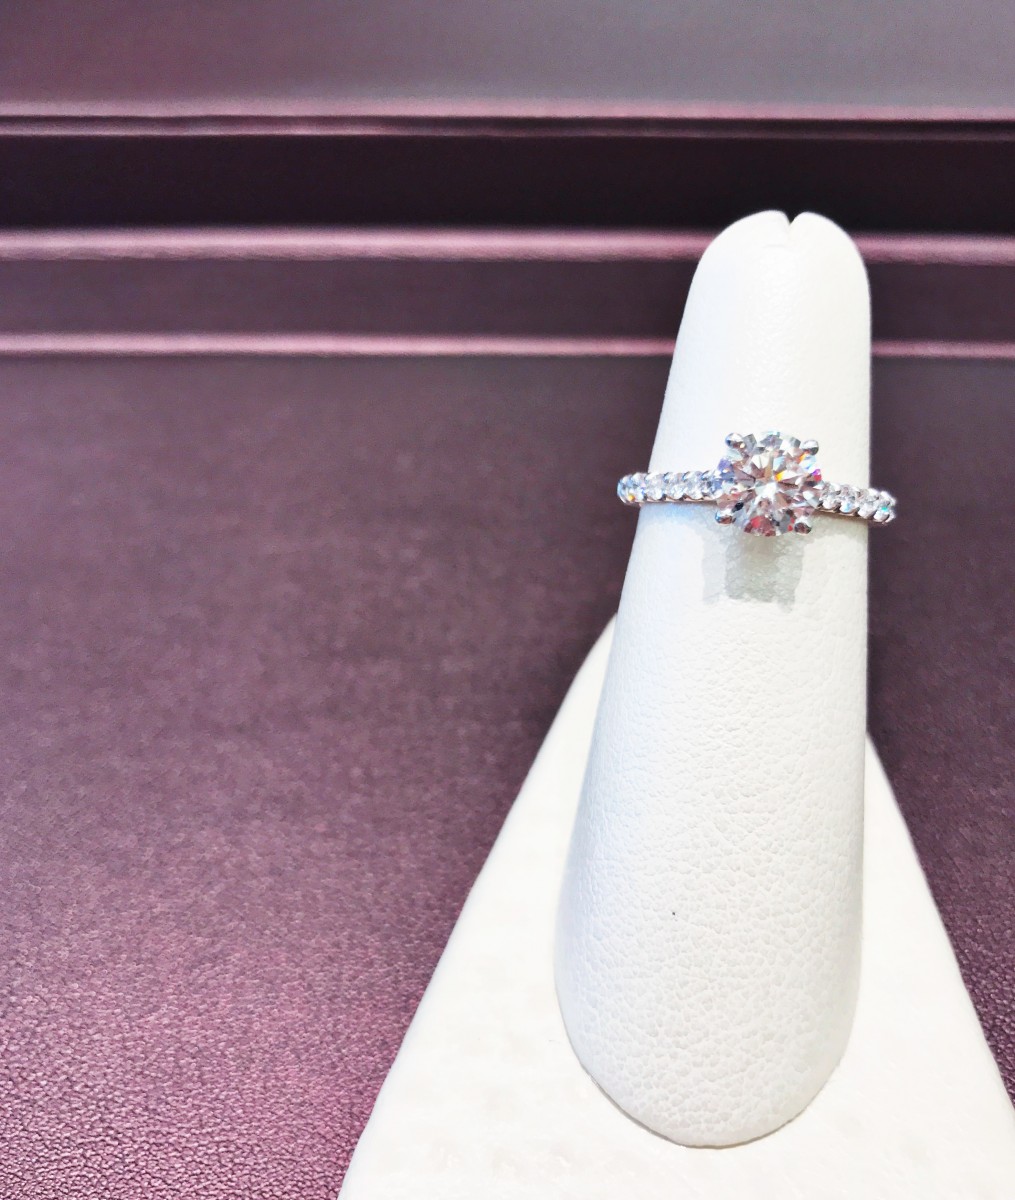 Discover Unique Diamond Engagement Rings at A.JAFFE | Designer Rings,  Wedding Bands & Fine Jewelry